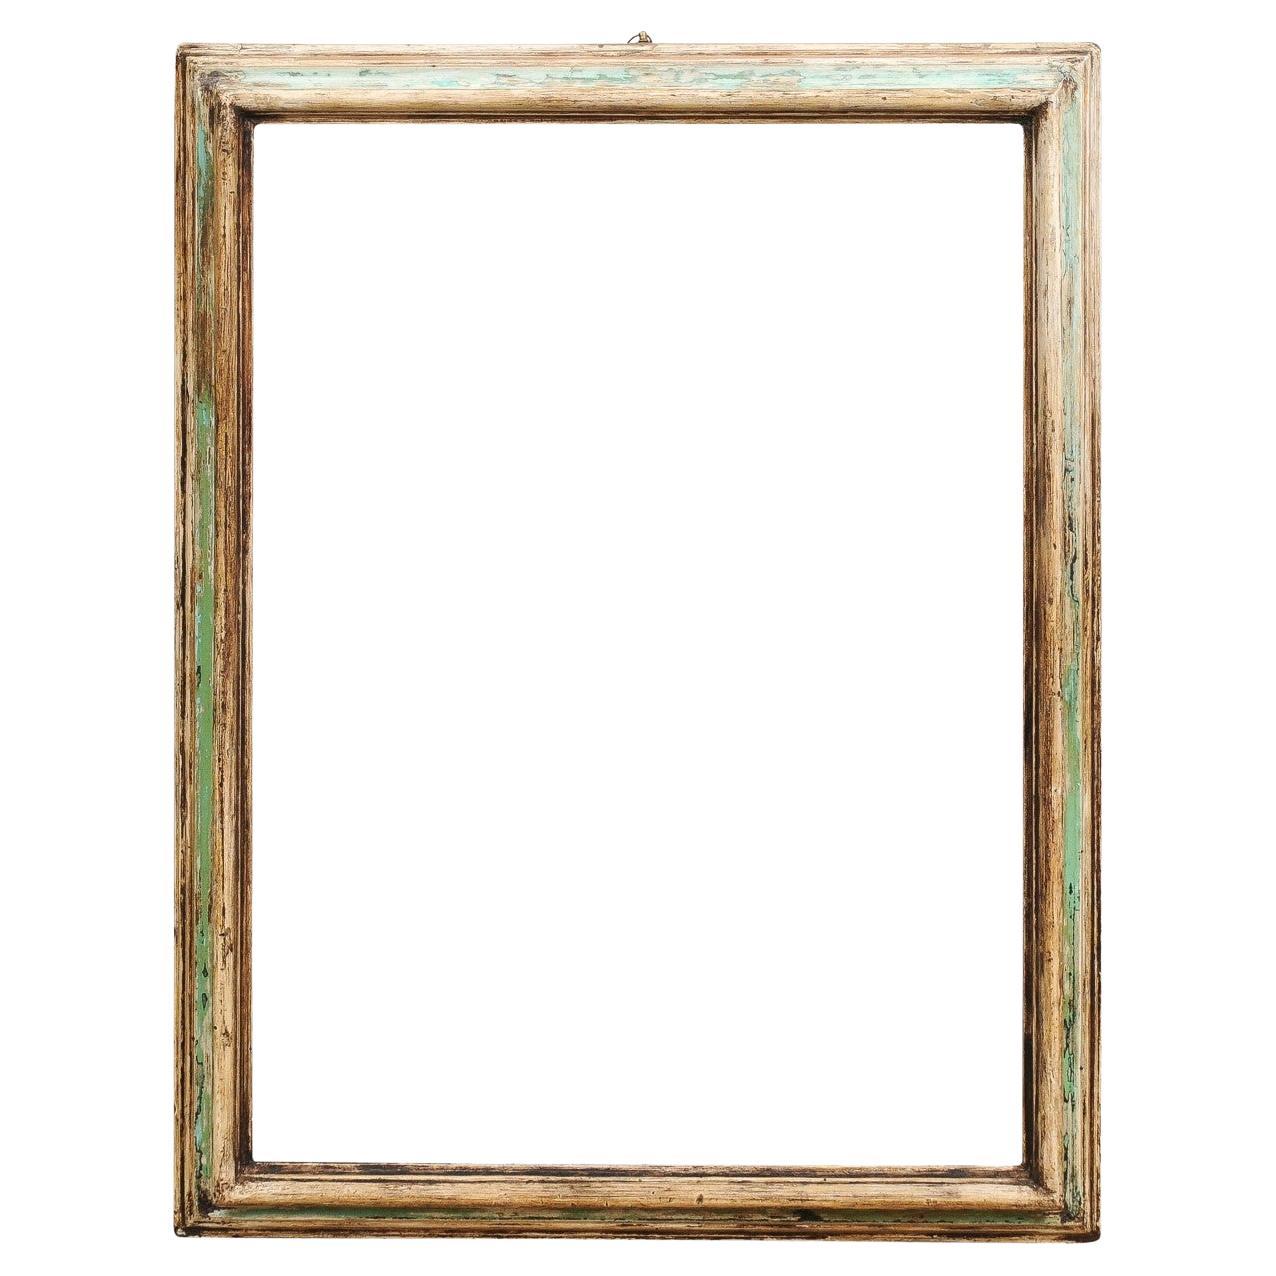 Italian 18th Century Green and Cream Painted Wooden Rectangular Frame For Sale